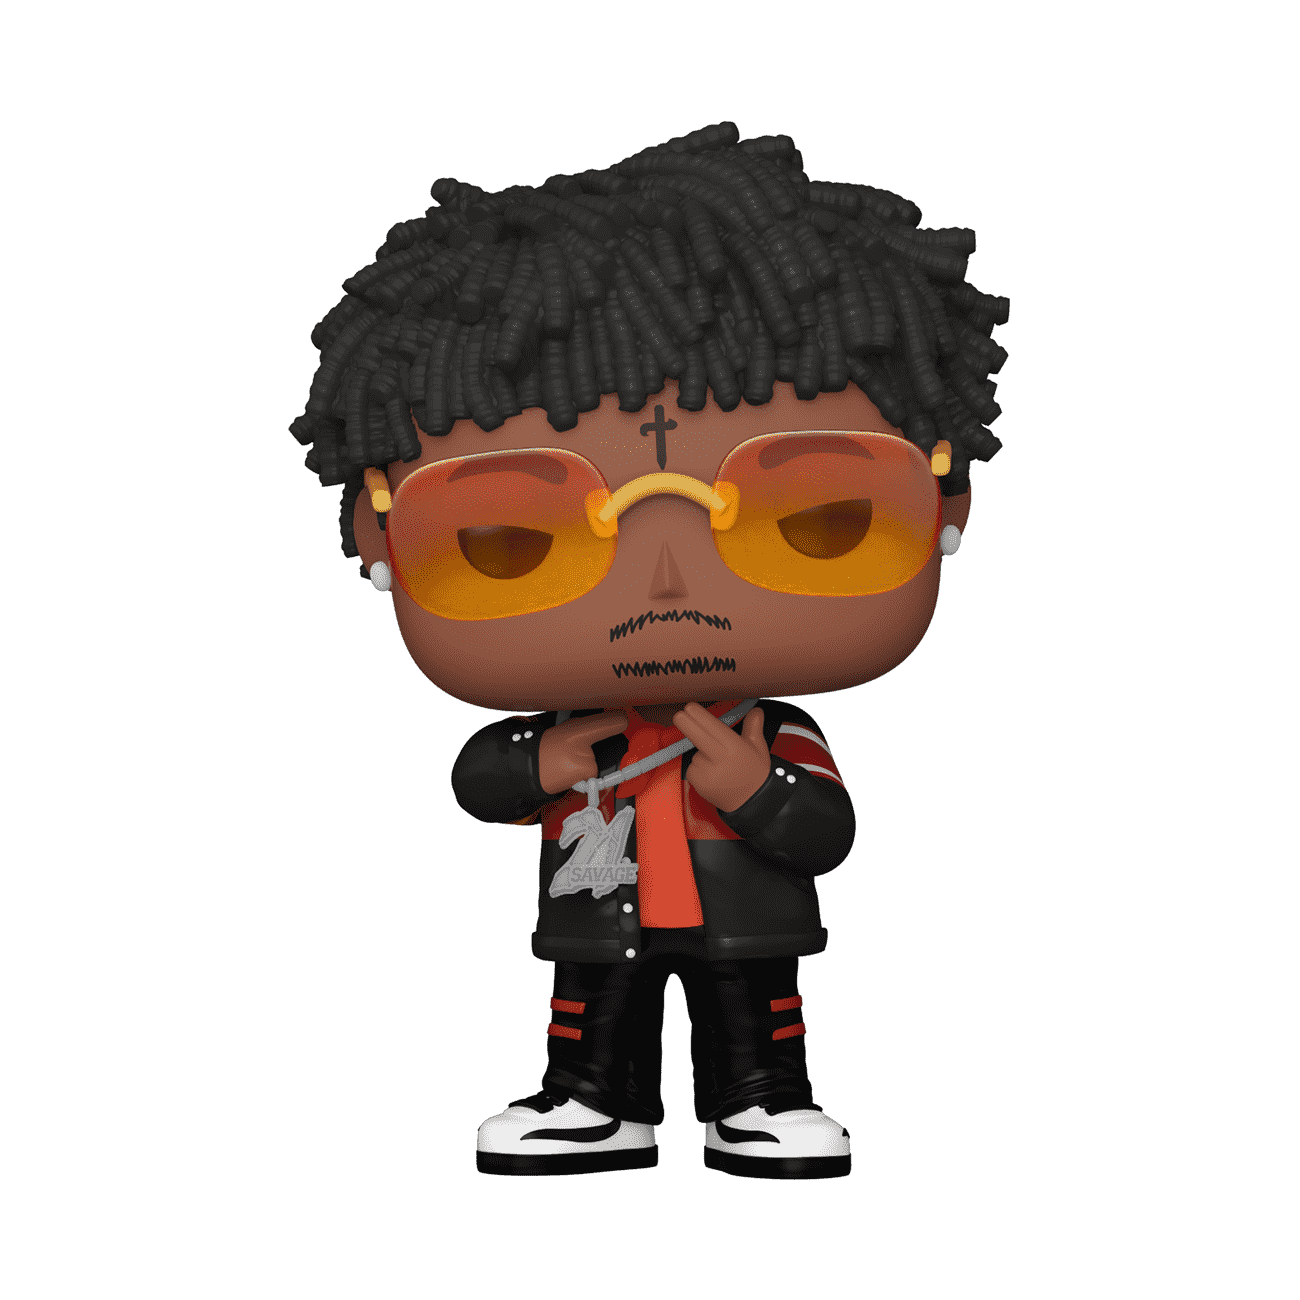 Download 21 Savage At The Live Stage